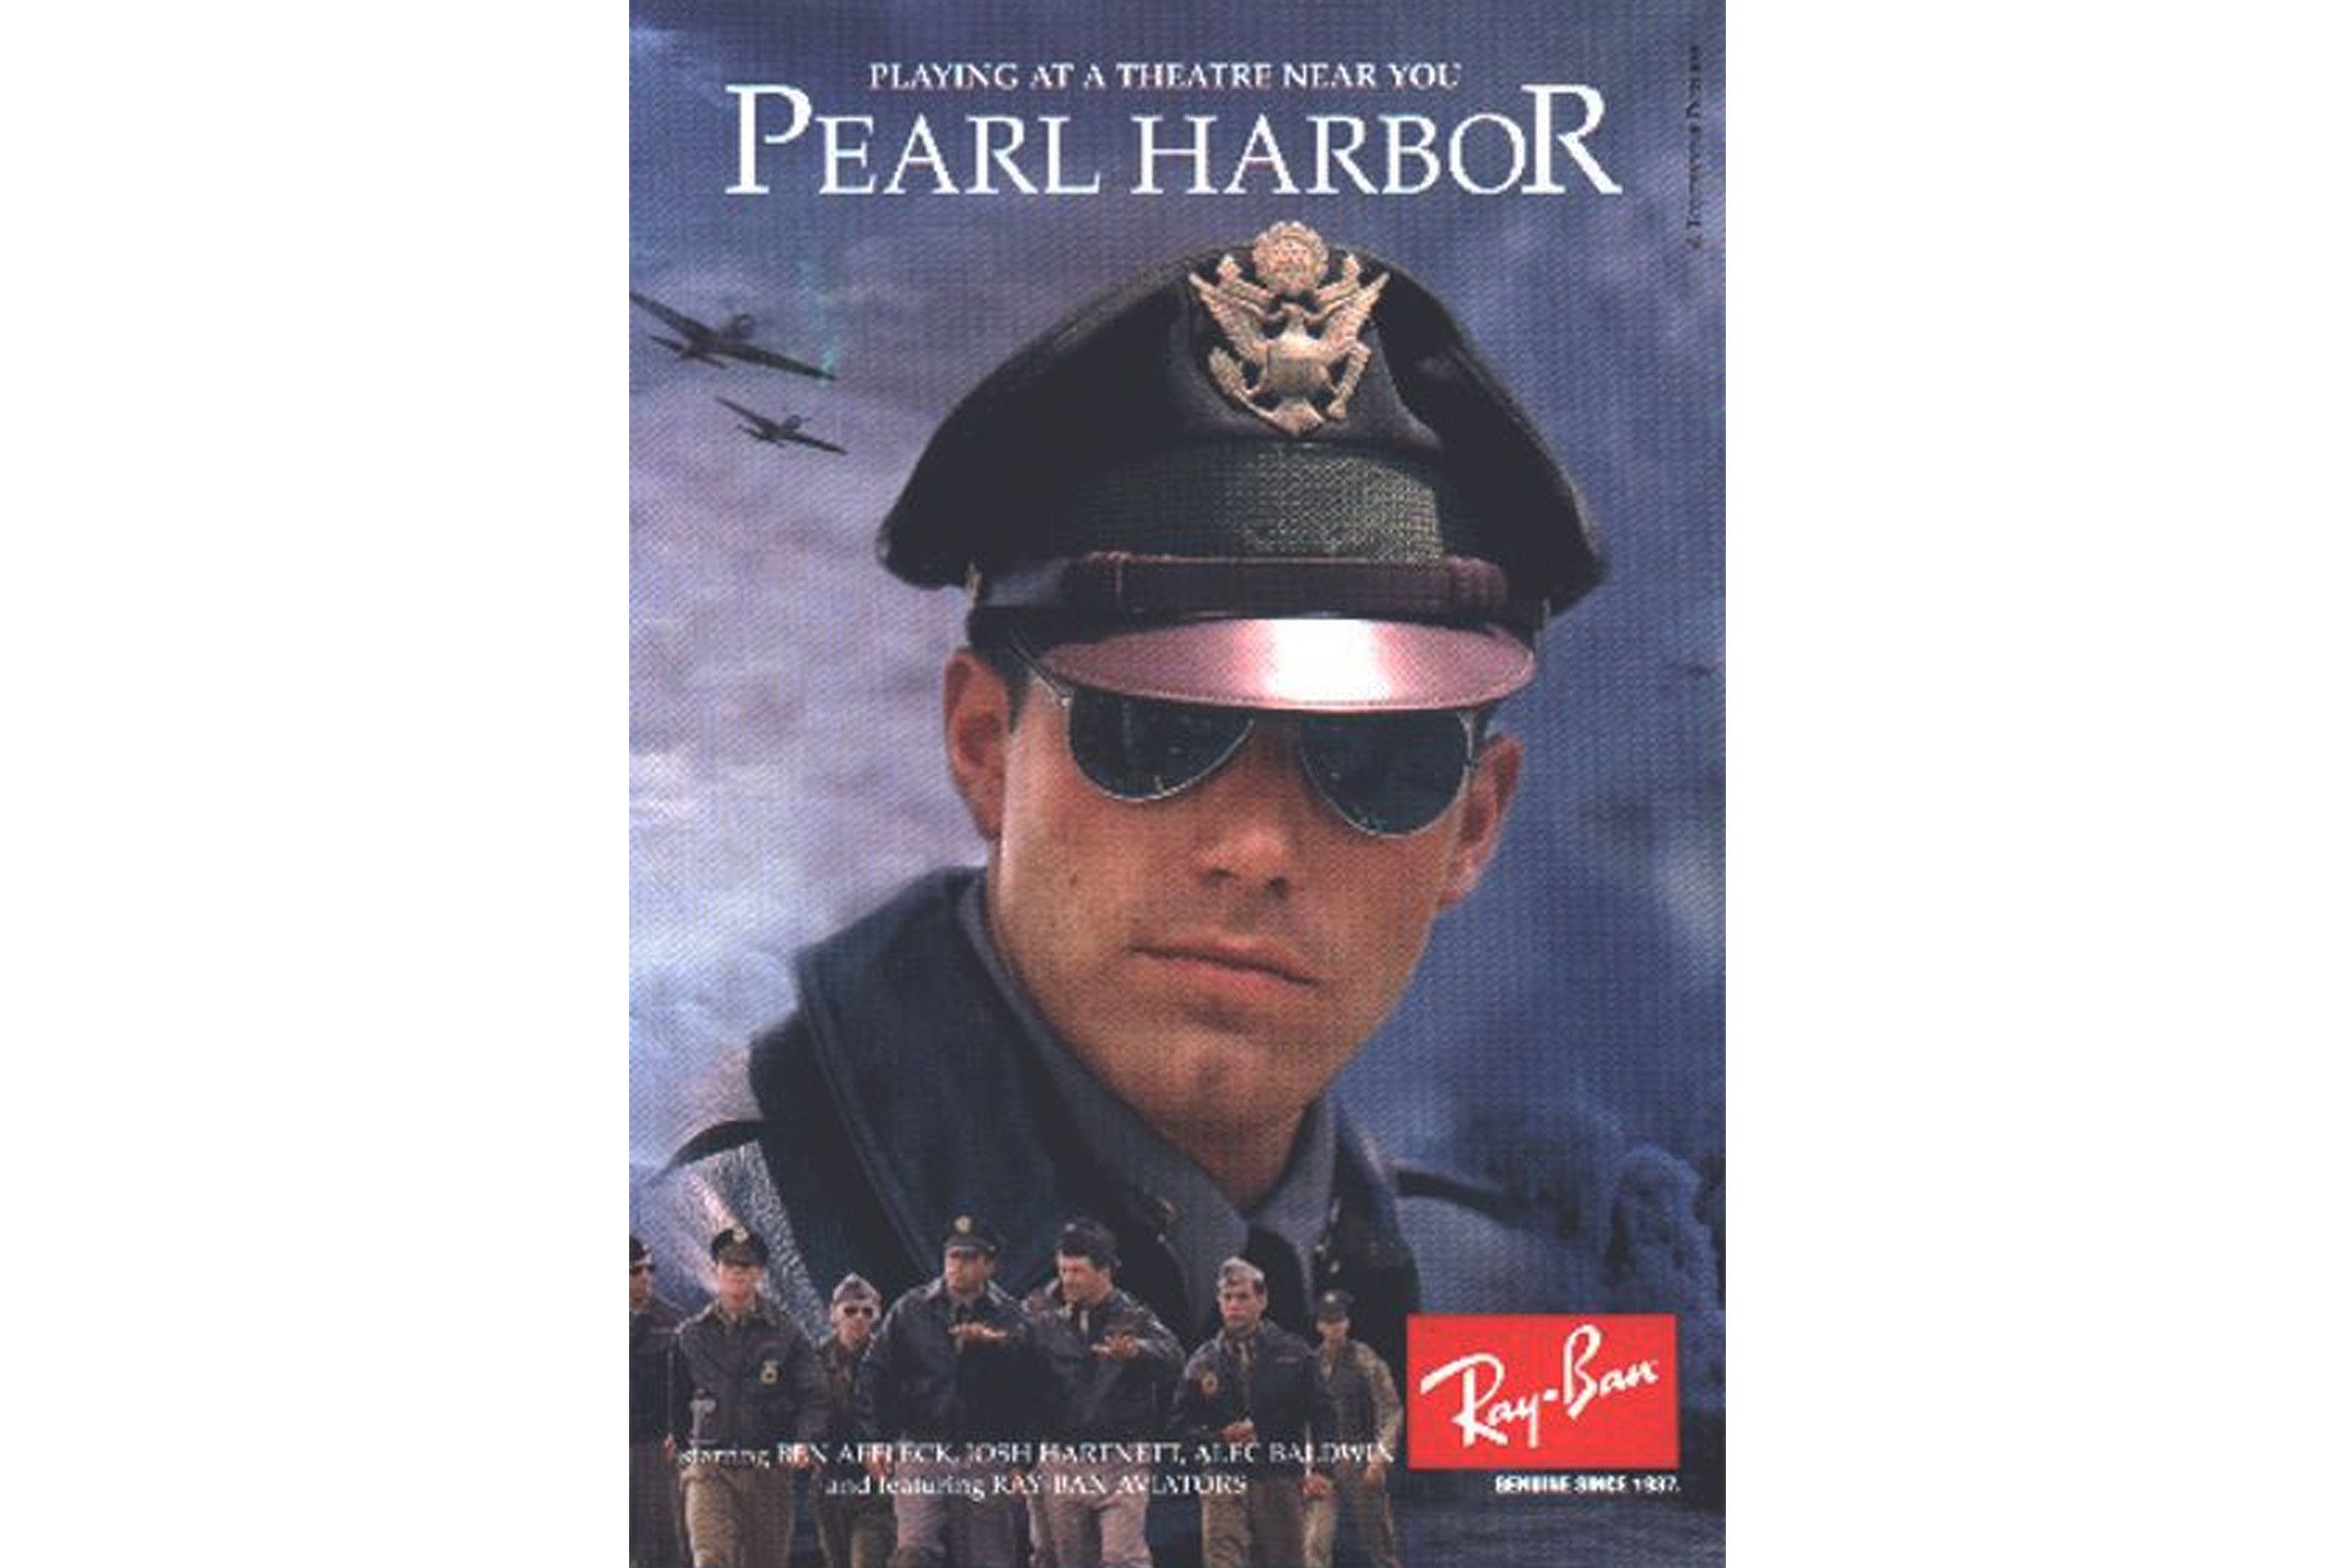 A cross-promotional "Pearl Harbor"-themed Ray-Ban ad featuring Ben Affleck